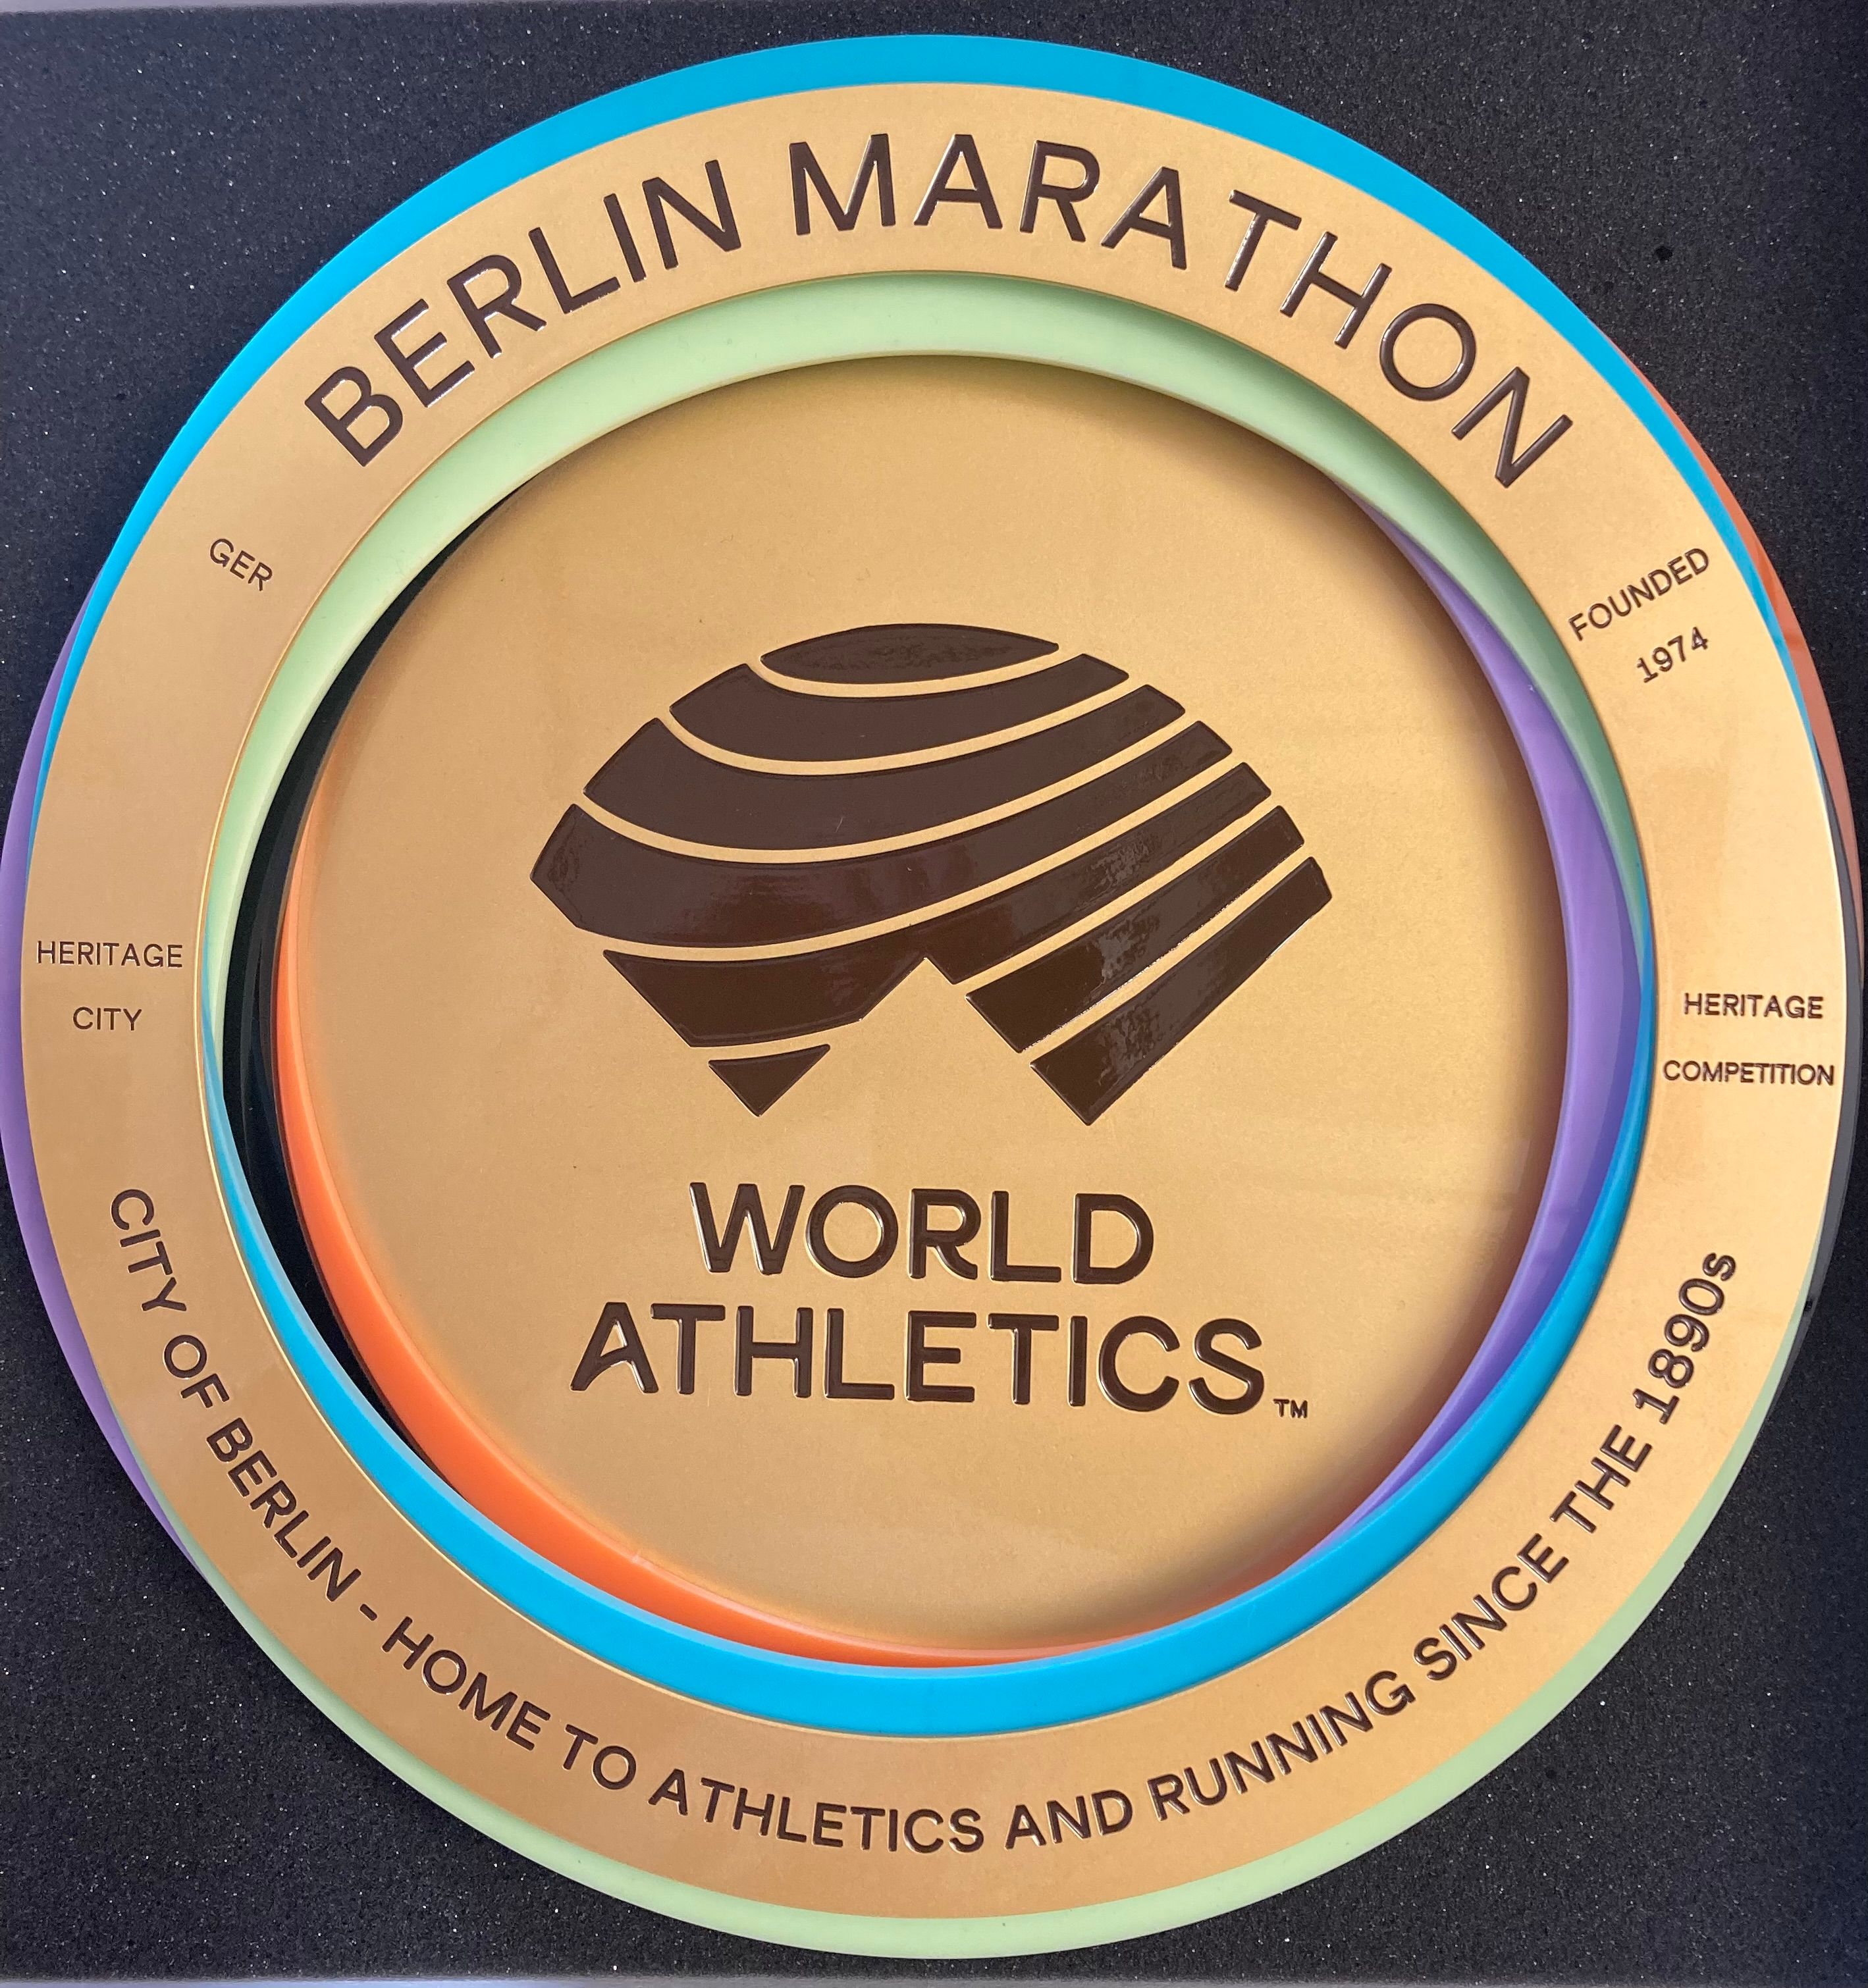 The Heritage Plaque awarded to Berlin and its marathon